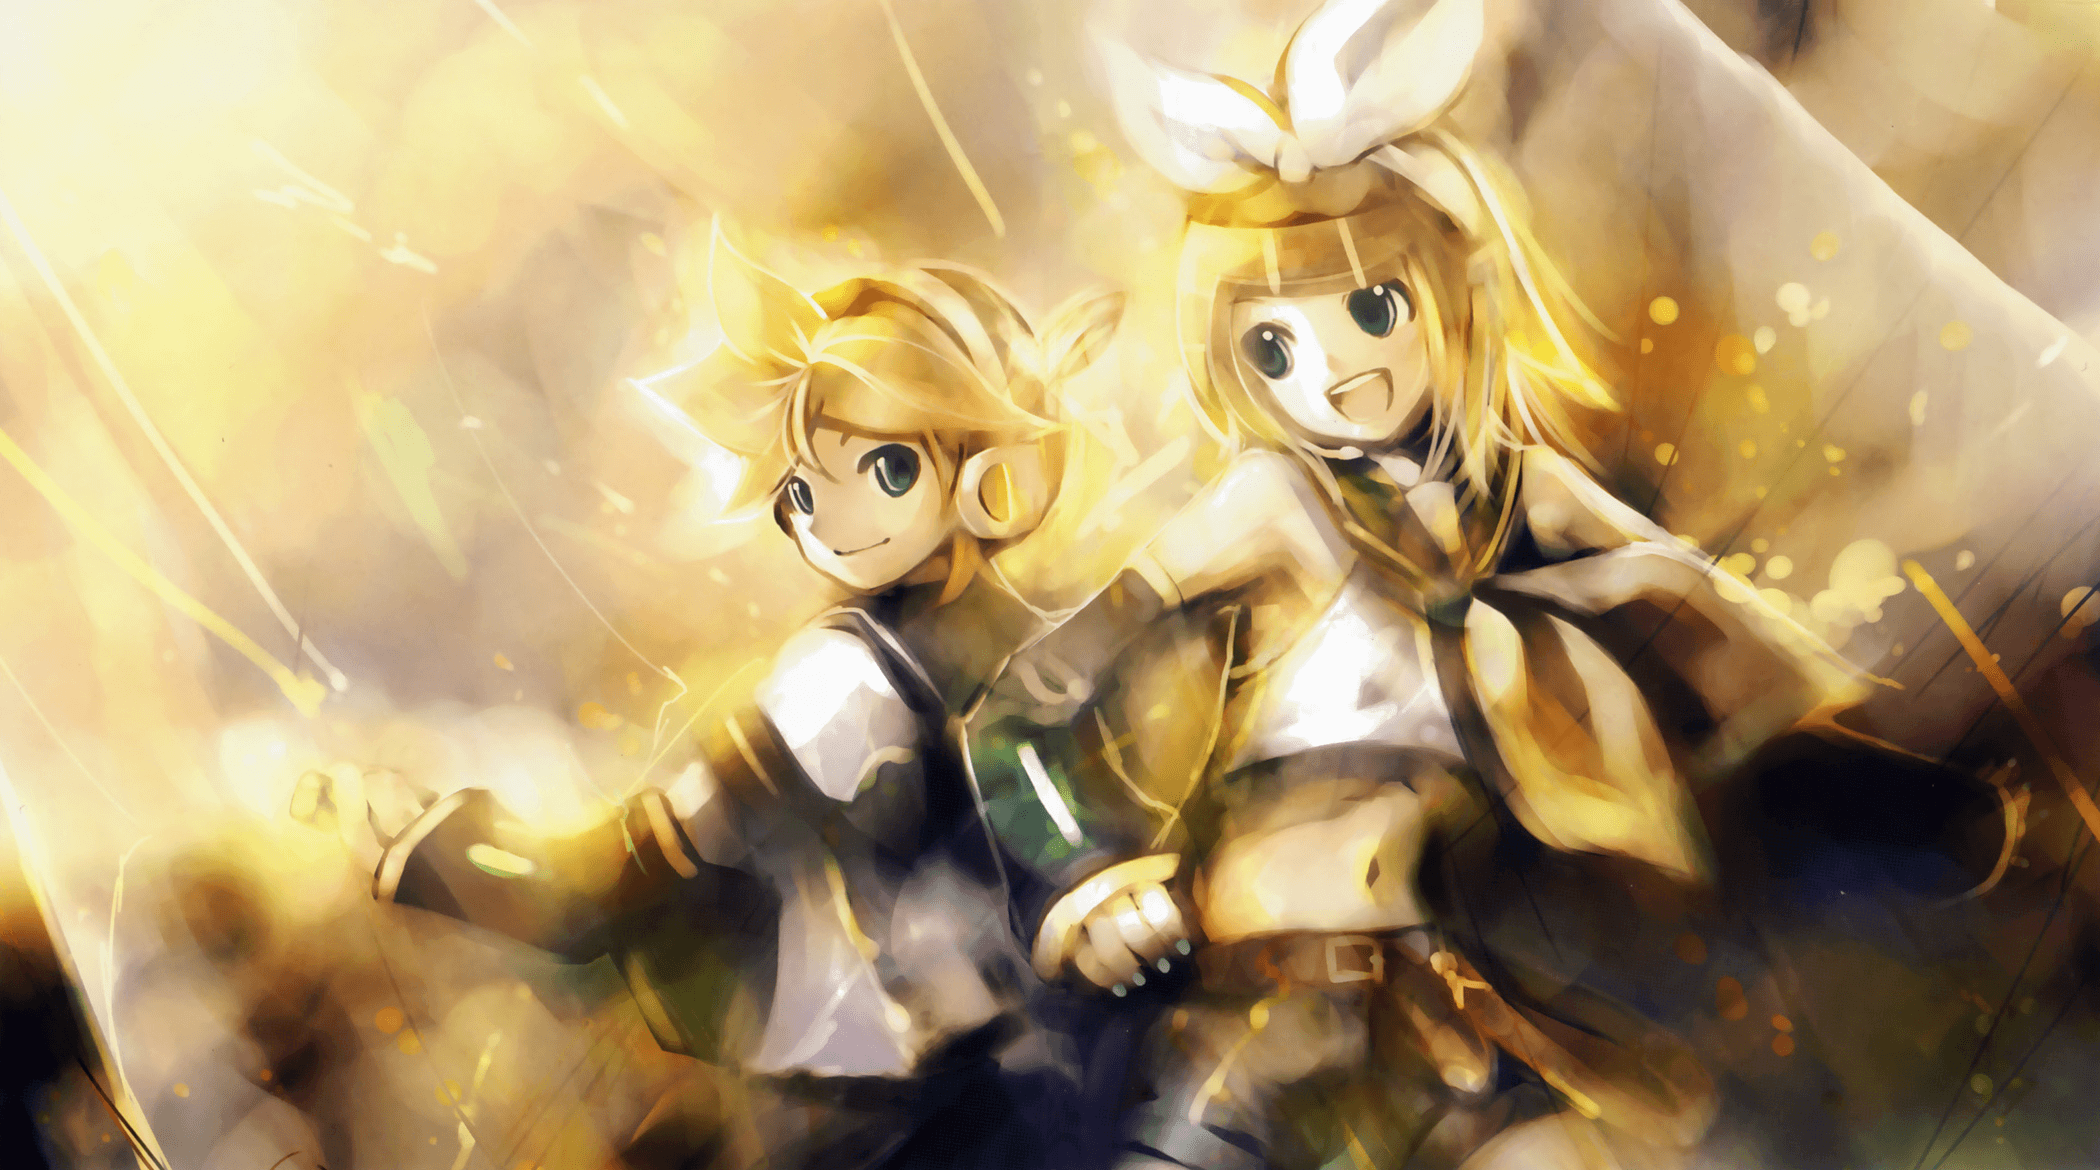 nejiten2 image Kagamine len and rin HD wallpaper and background